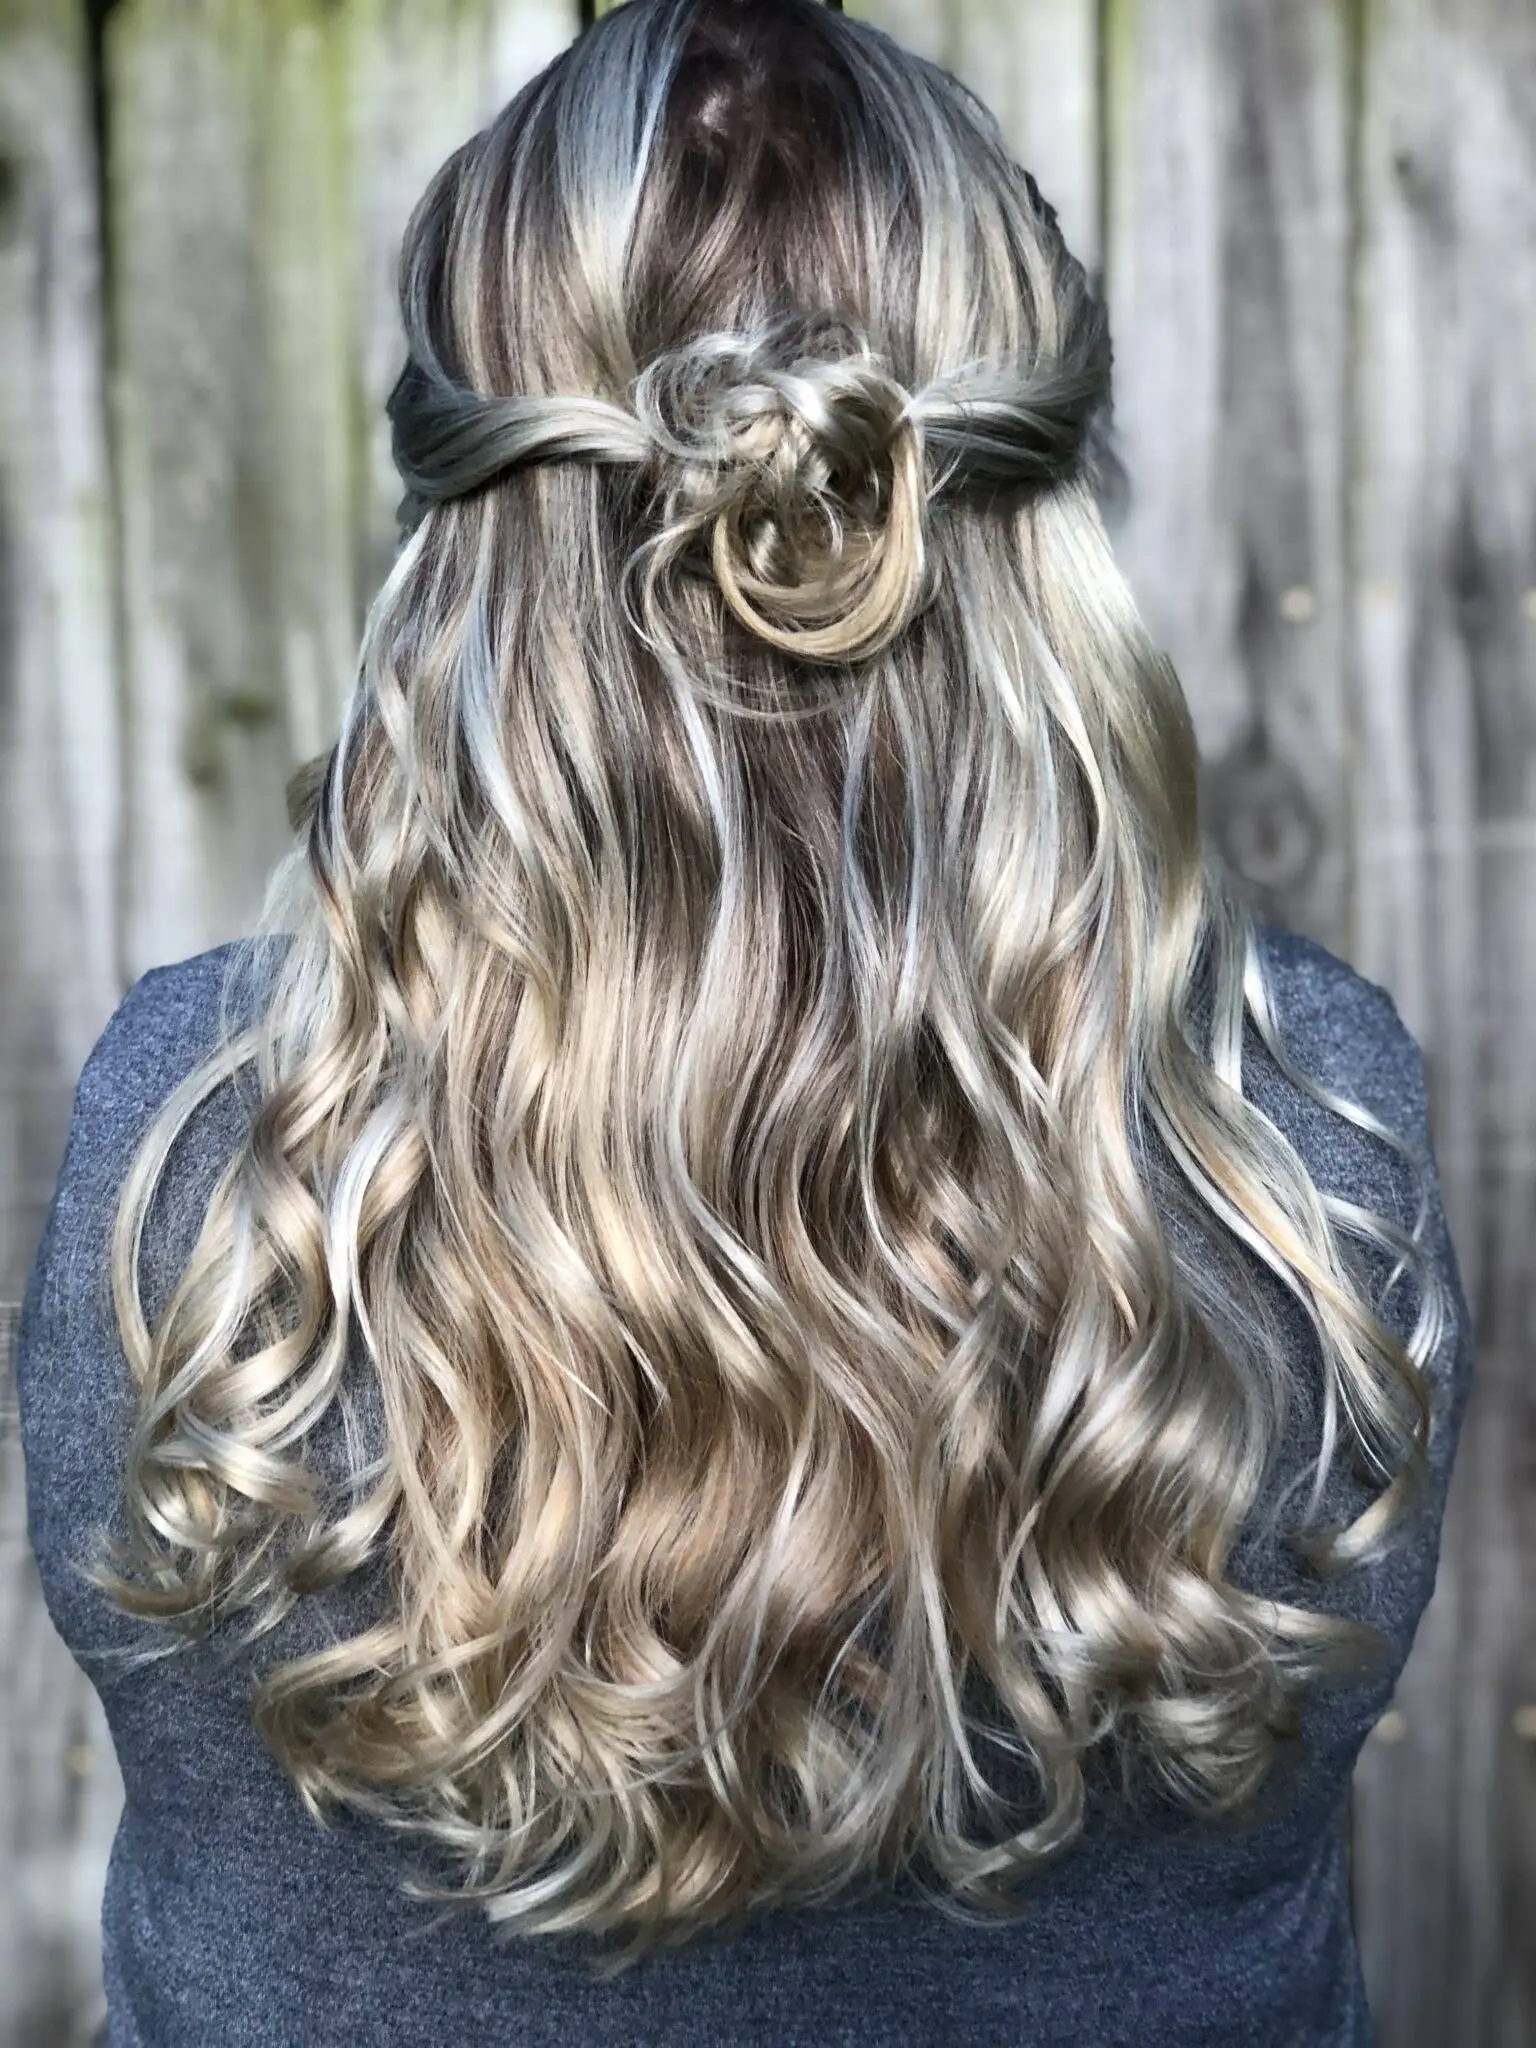 Blond Highlights Tied in back